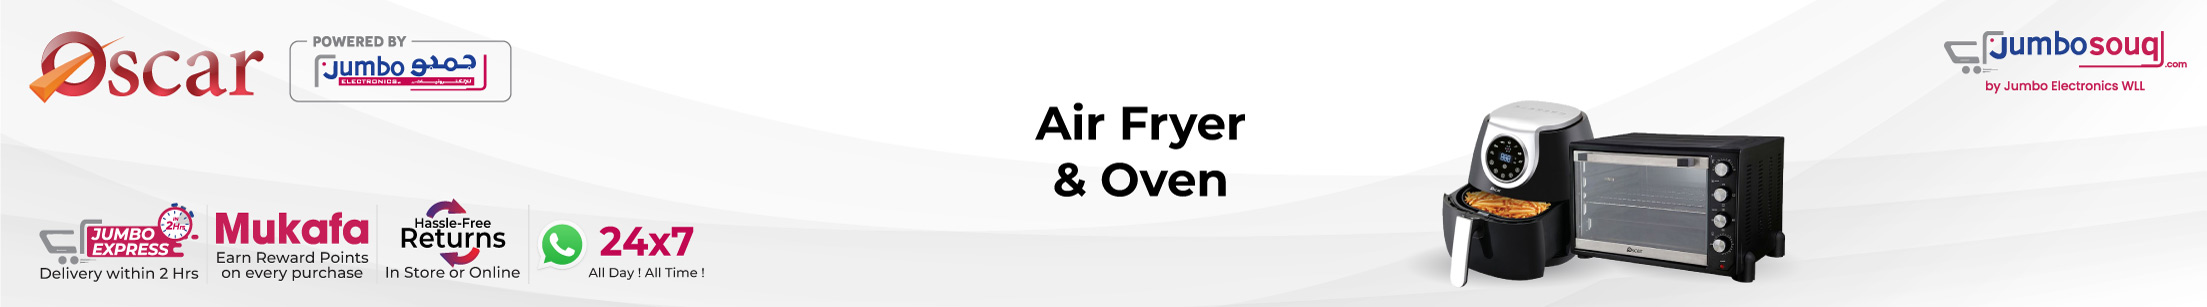 Air Fryers & Ovens